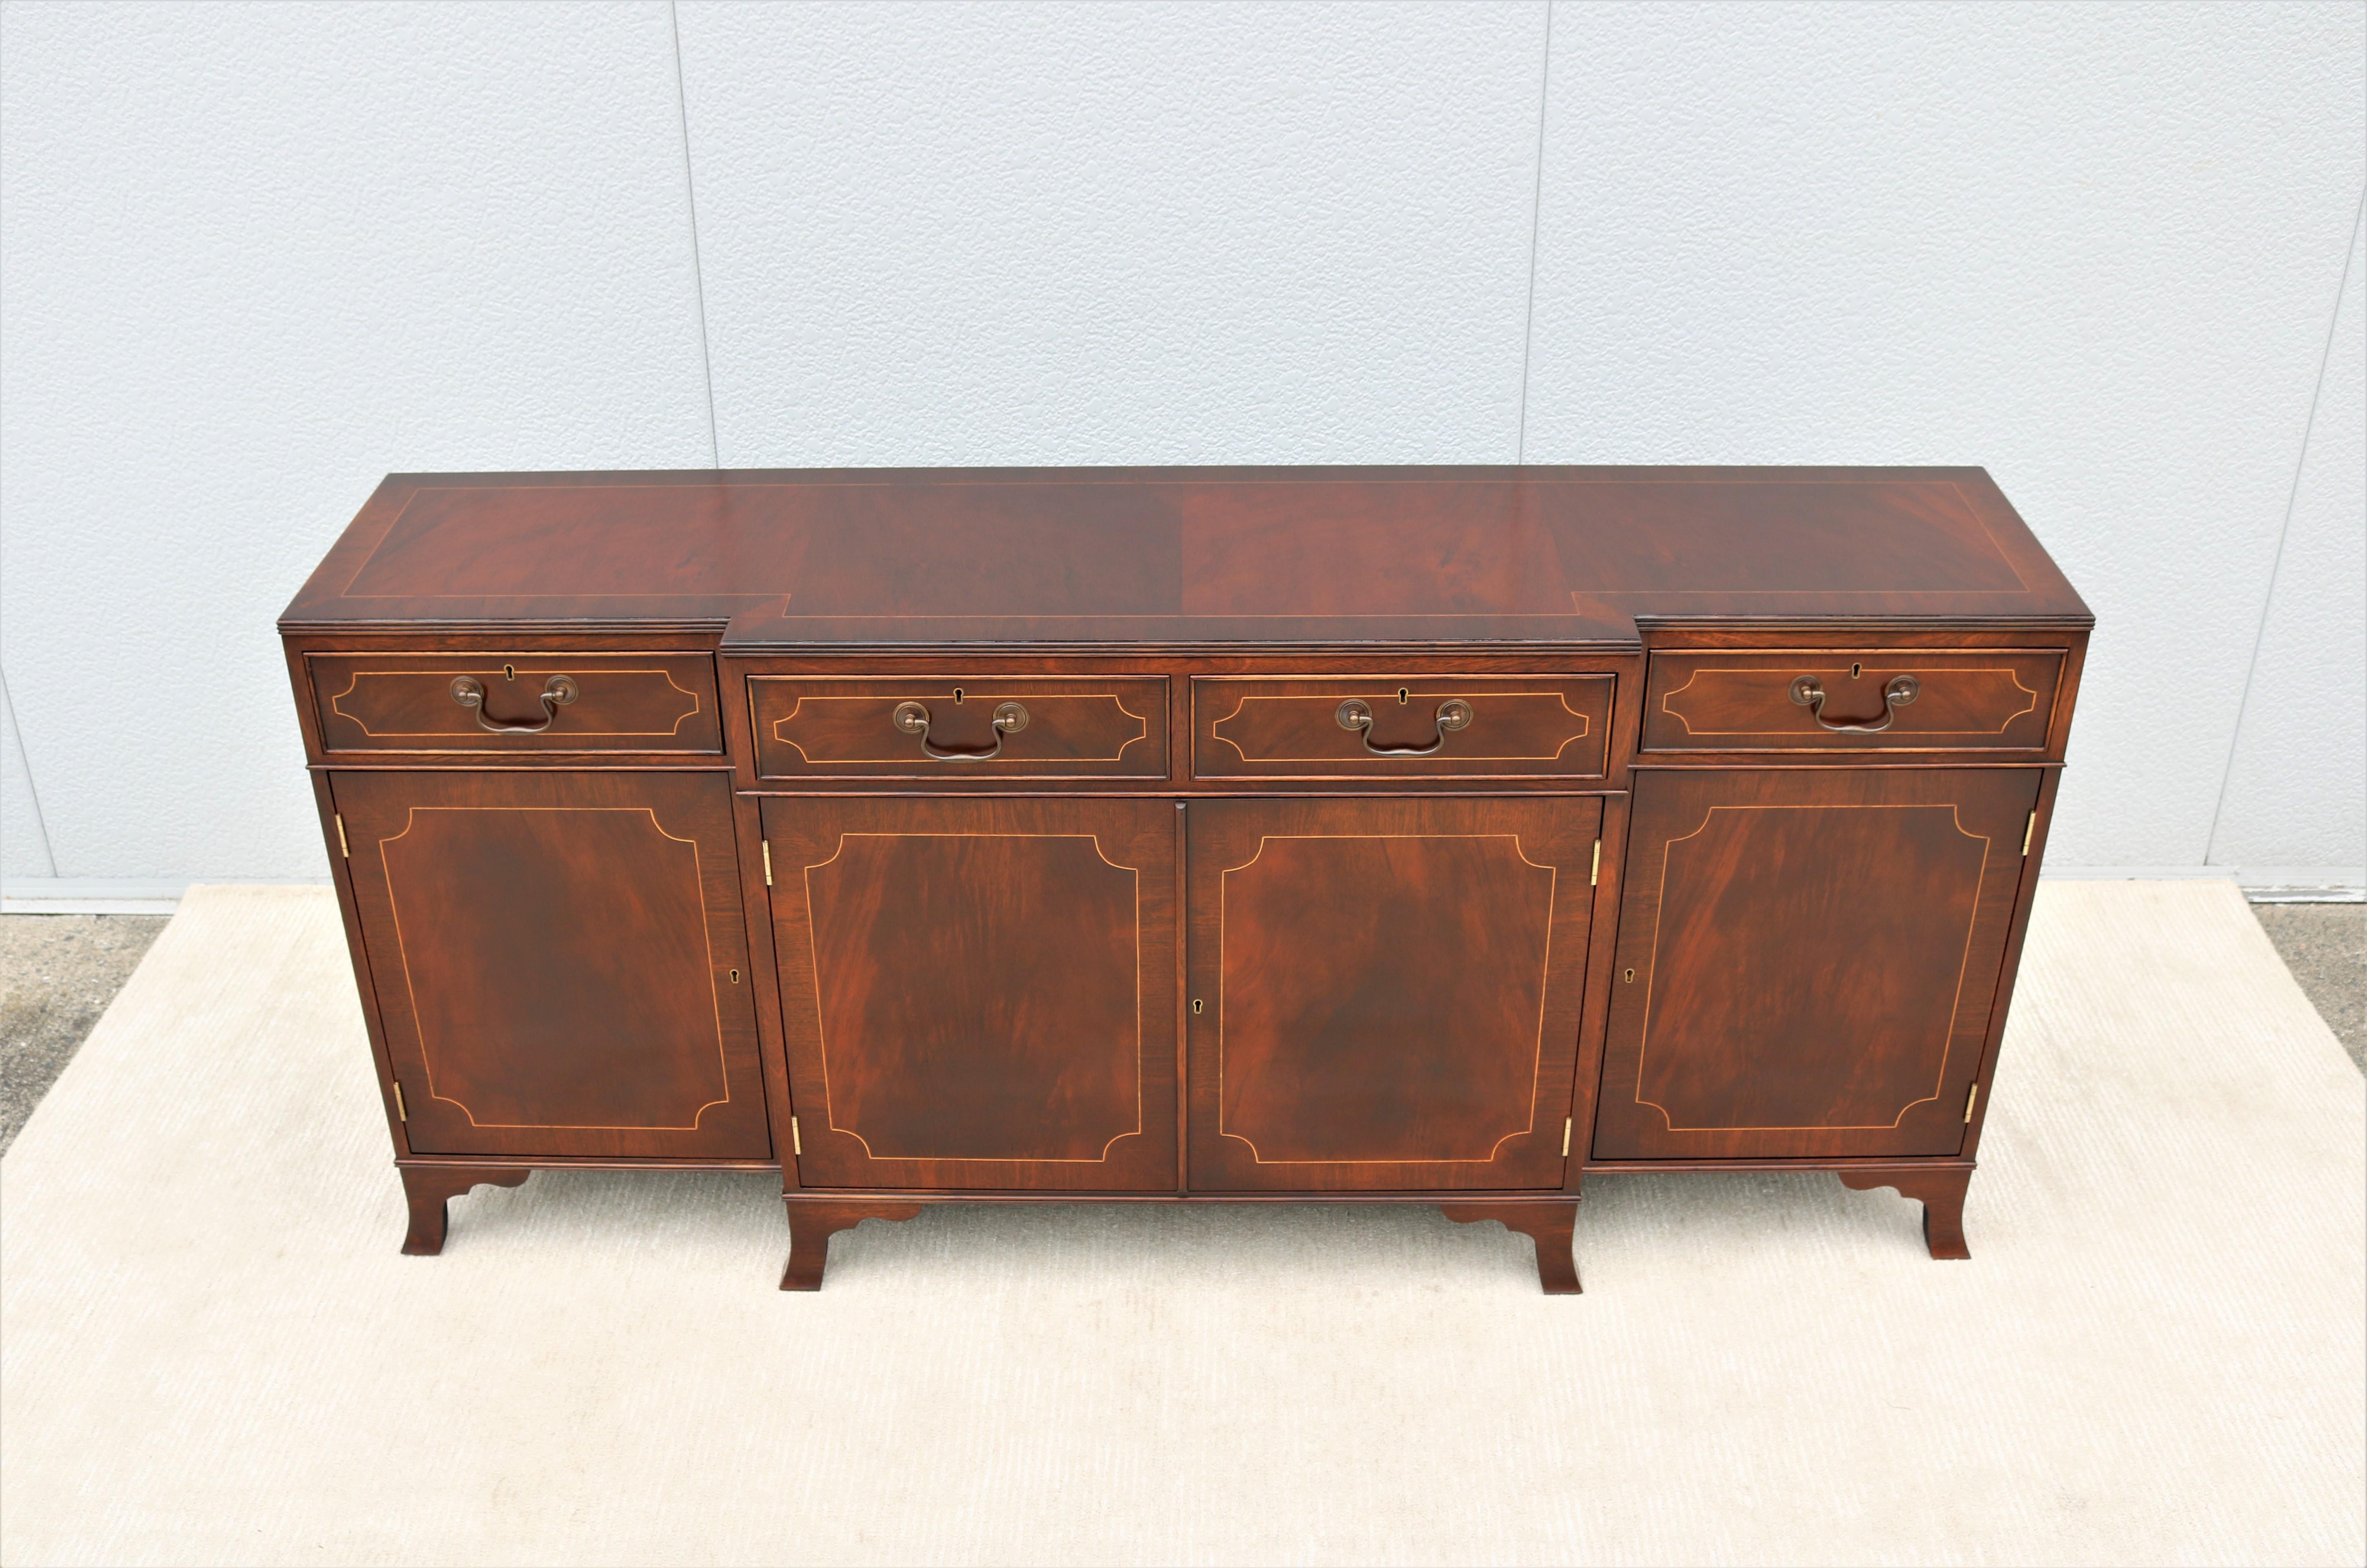 Fabulous vintage traditional English Sheraton style breakfronted mahogany cabinet.
A classic timeless and luxurious style inspired by the 18th and 19th century English design.
The construction of Trosby furniture is dedicated to hand-crafting with